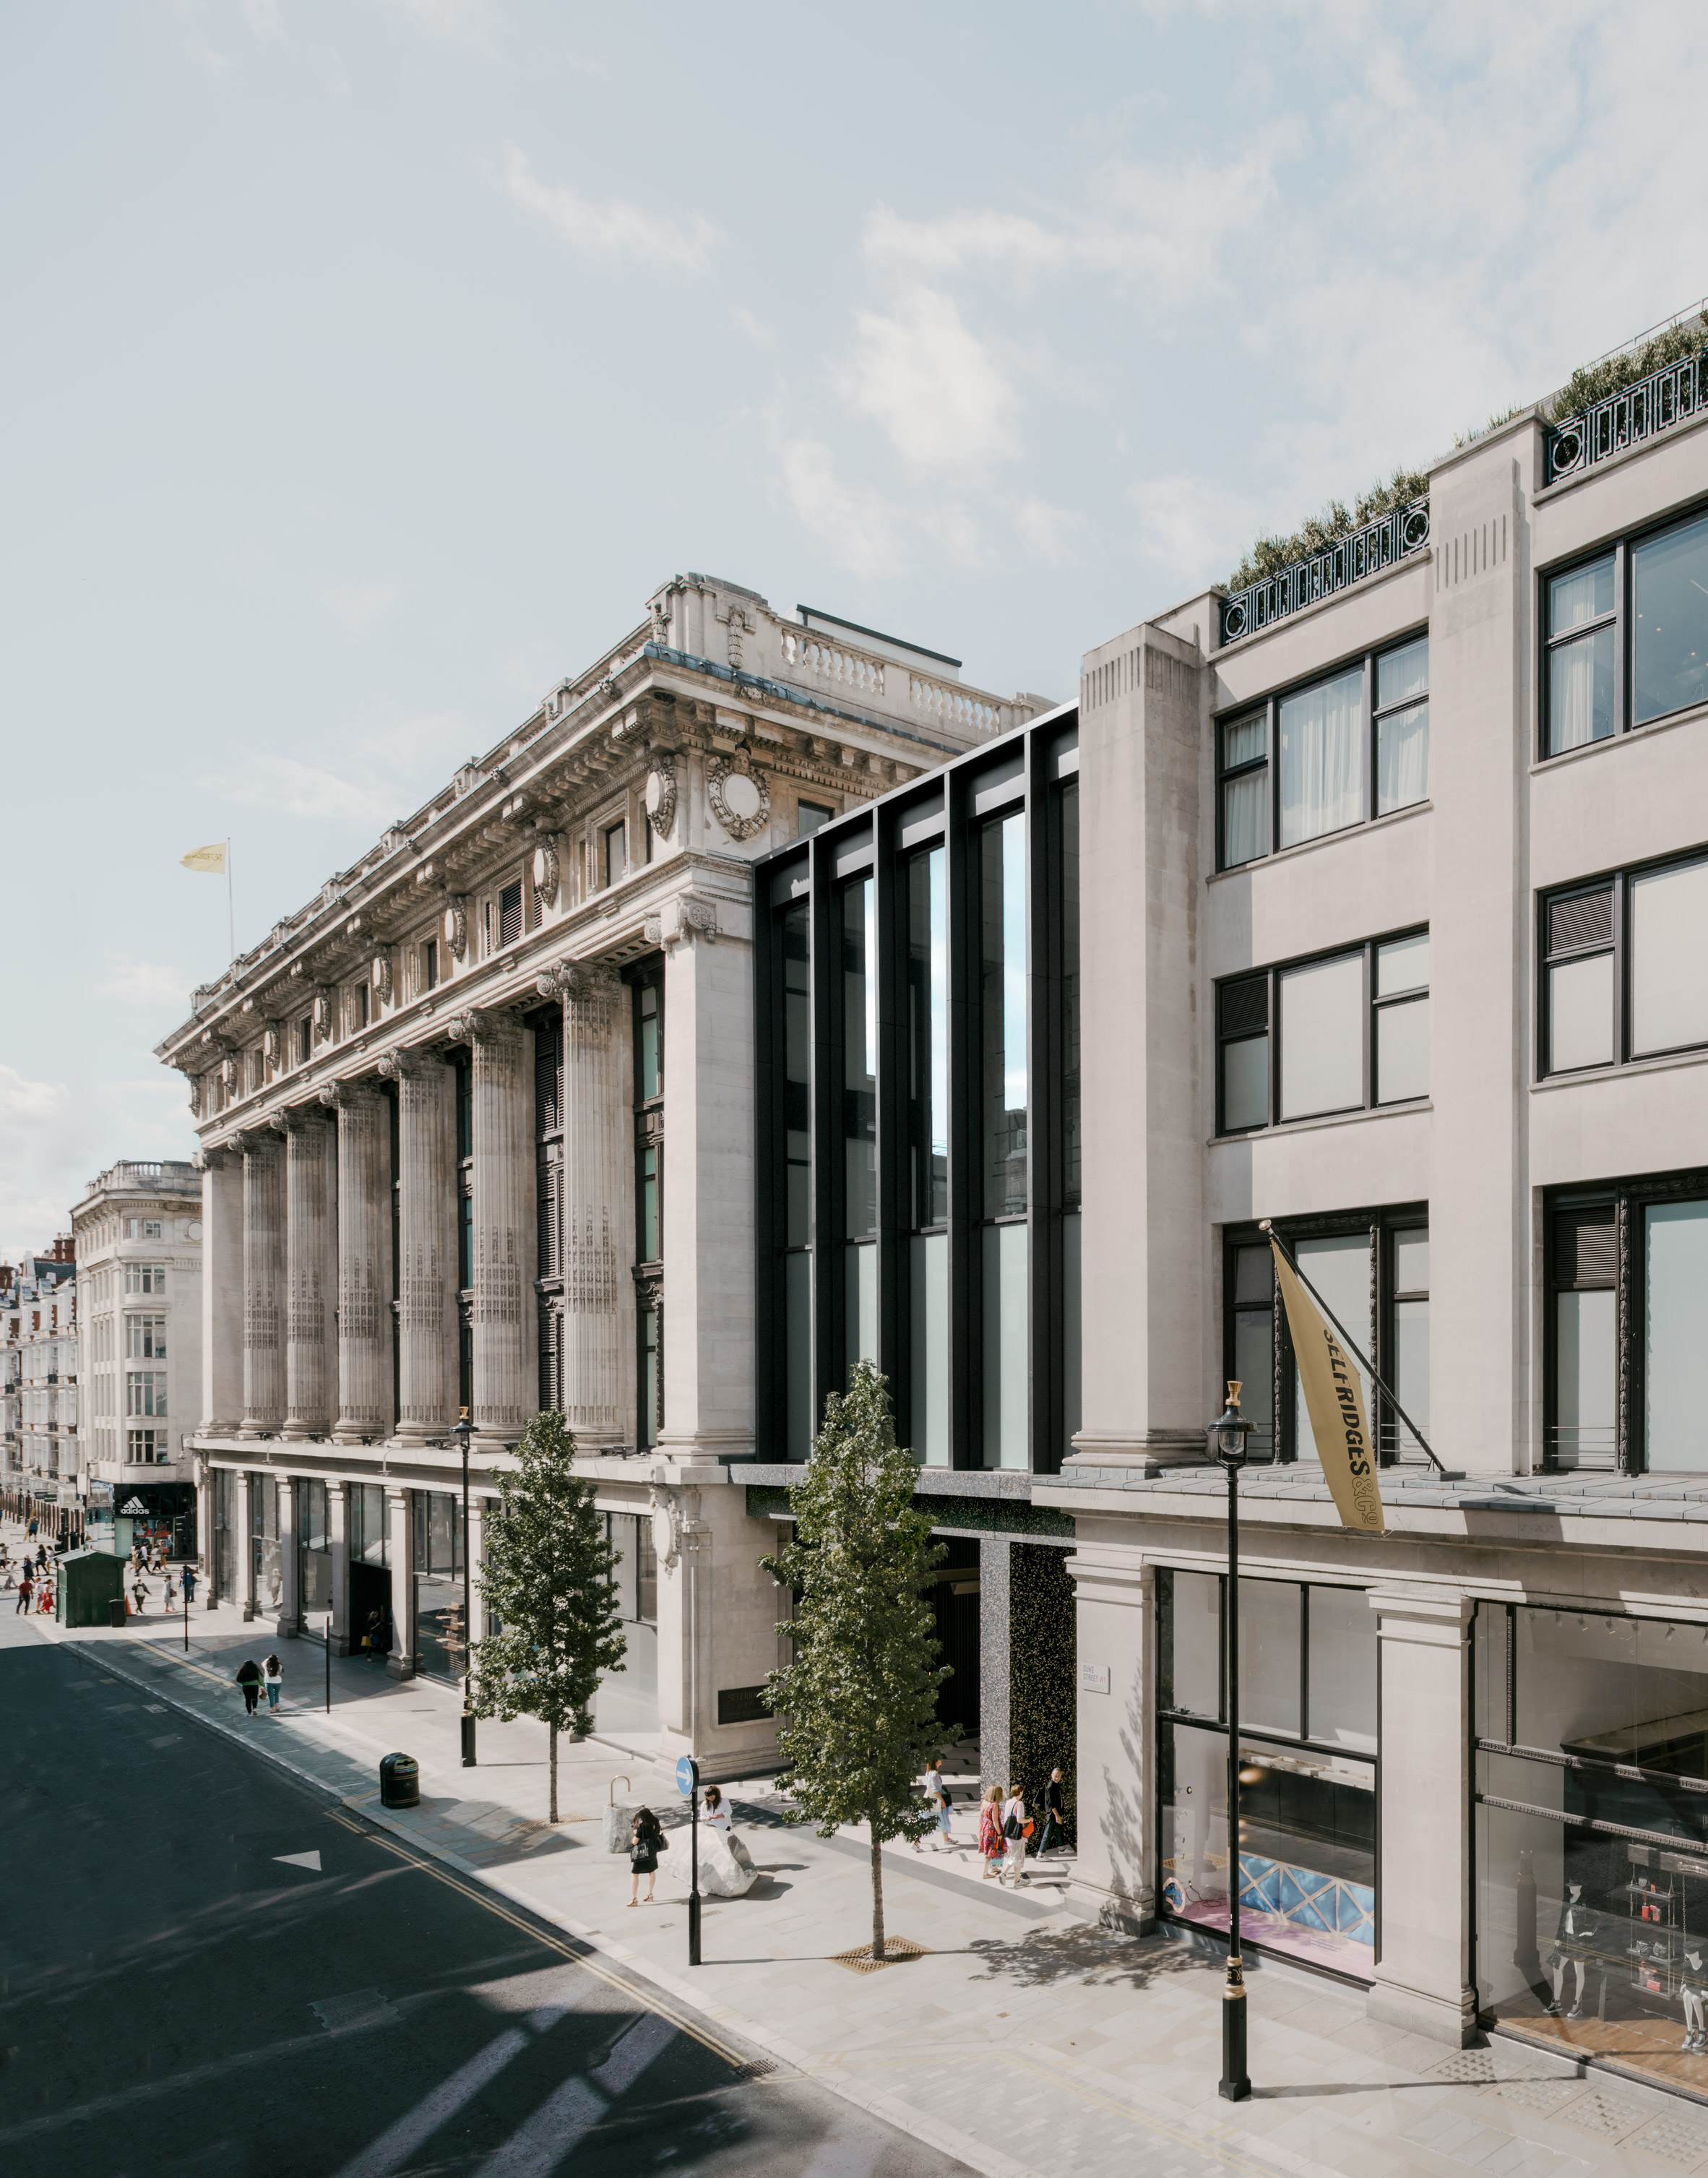 Selfridges department store extension by David Chipperfield Architects